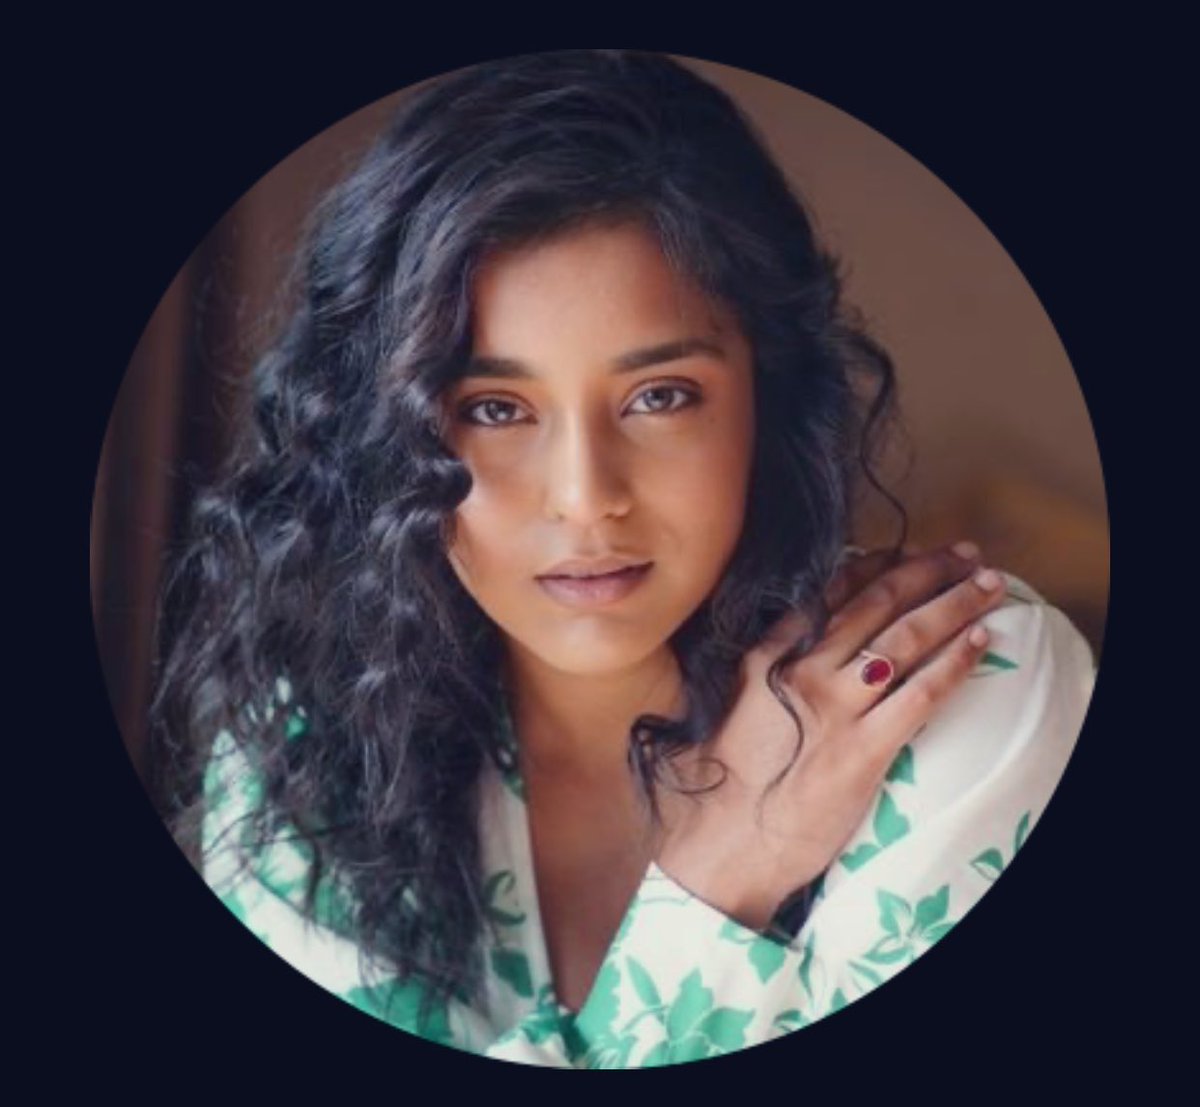 #SumbulTouqeerKhan 

when did she change the pic 😍.. I missed it 😢 curly hair suits her the most 🙂